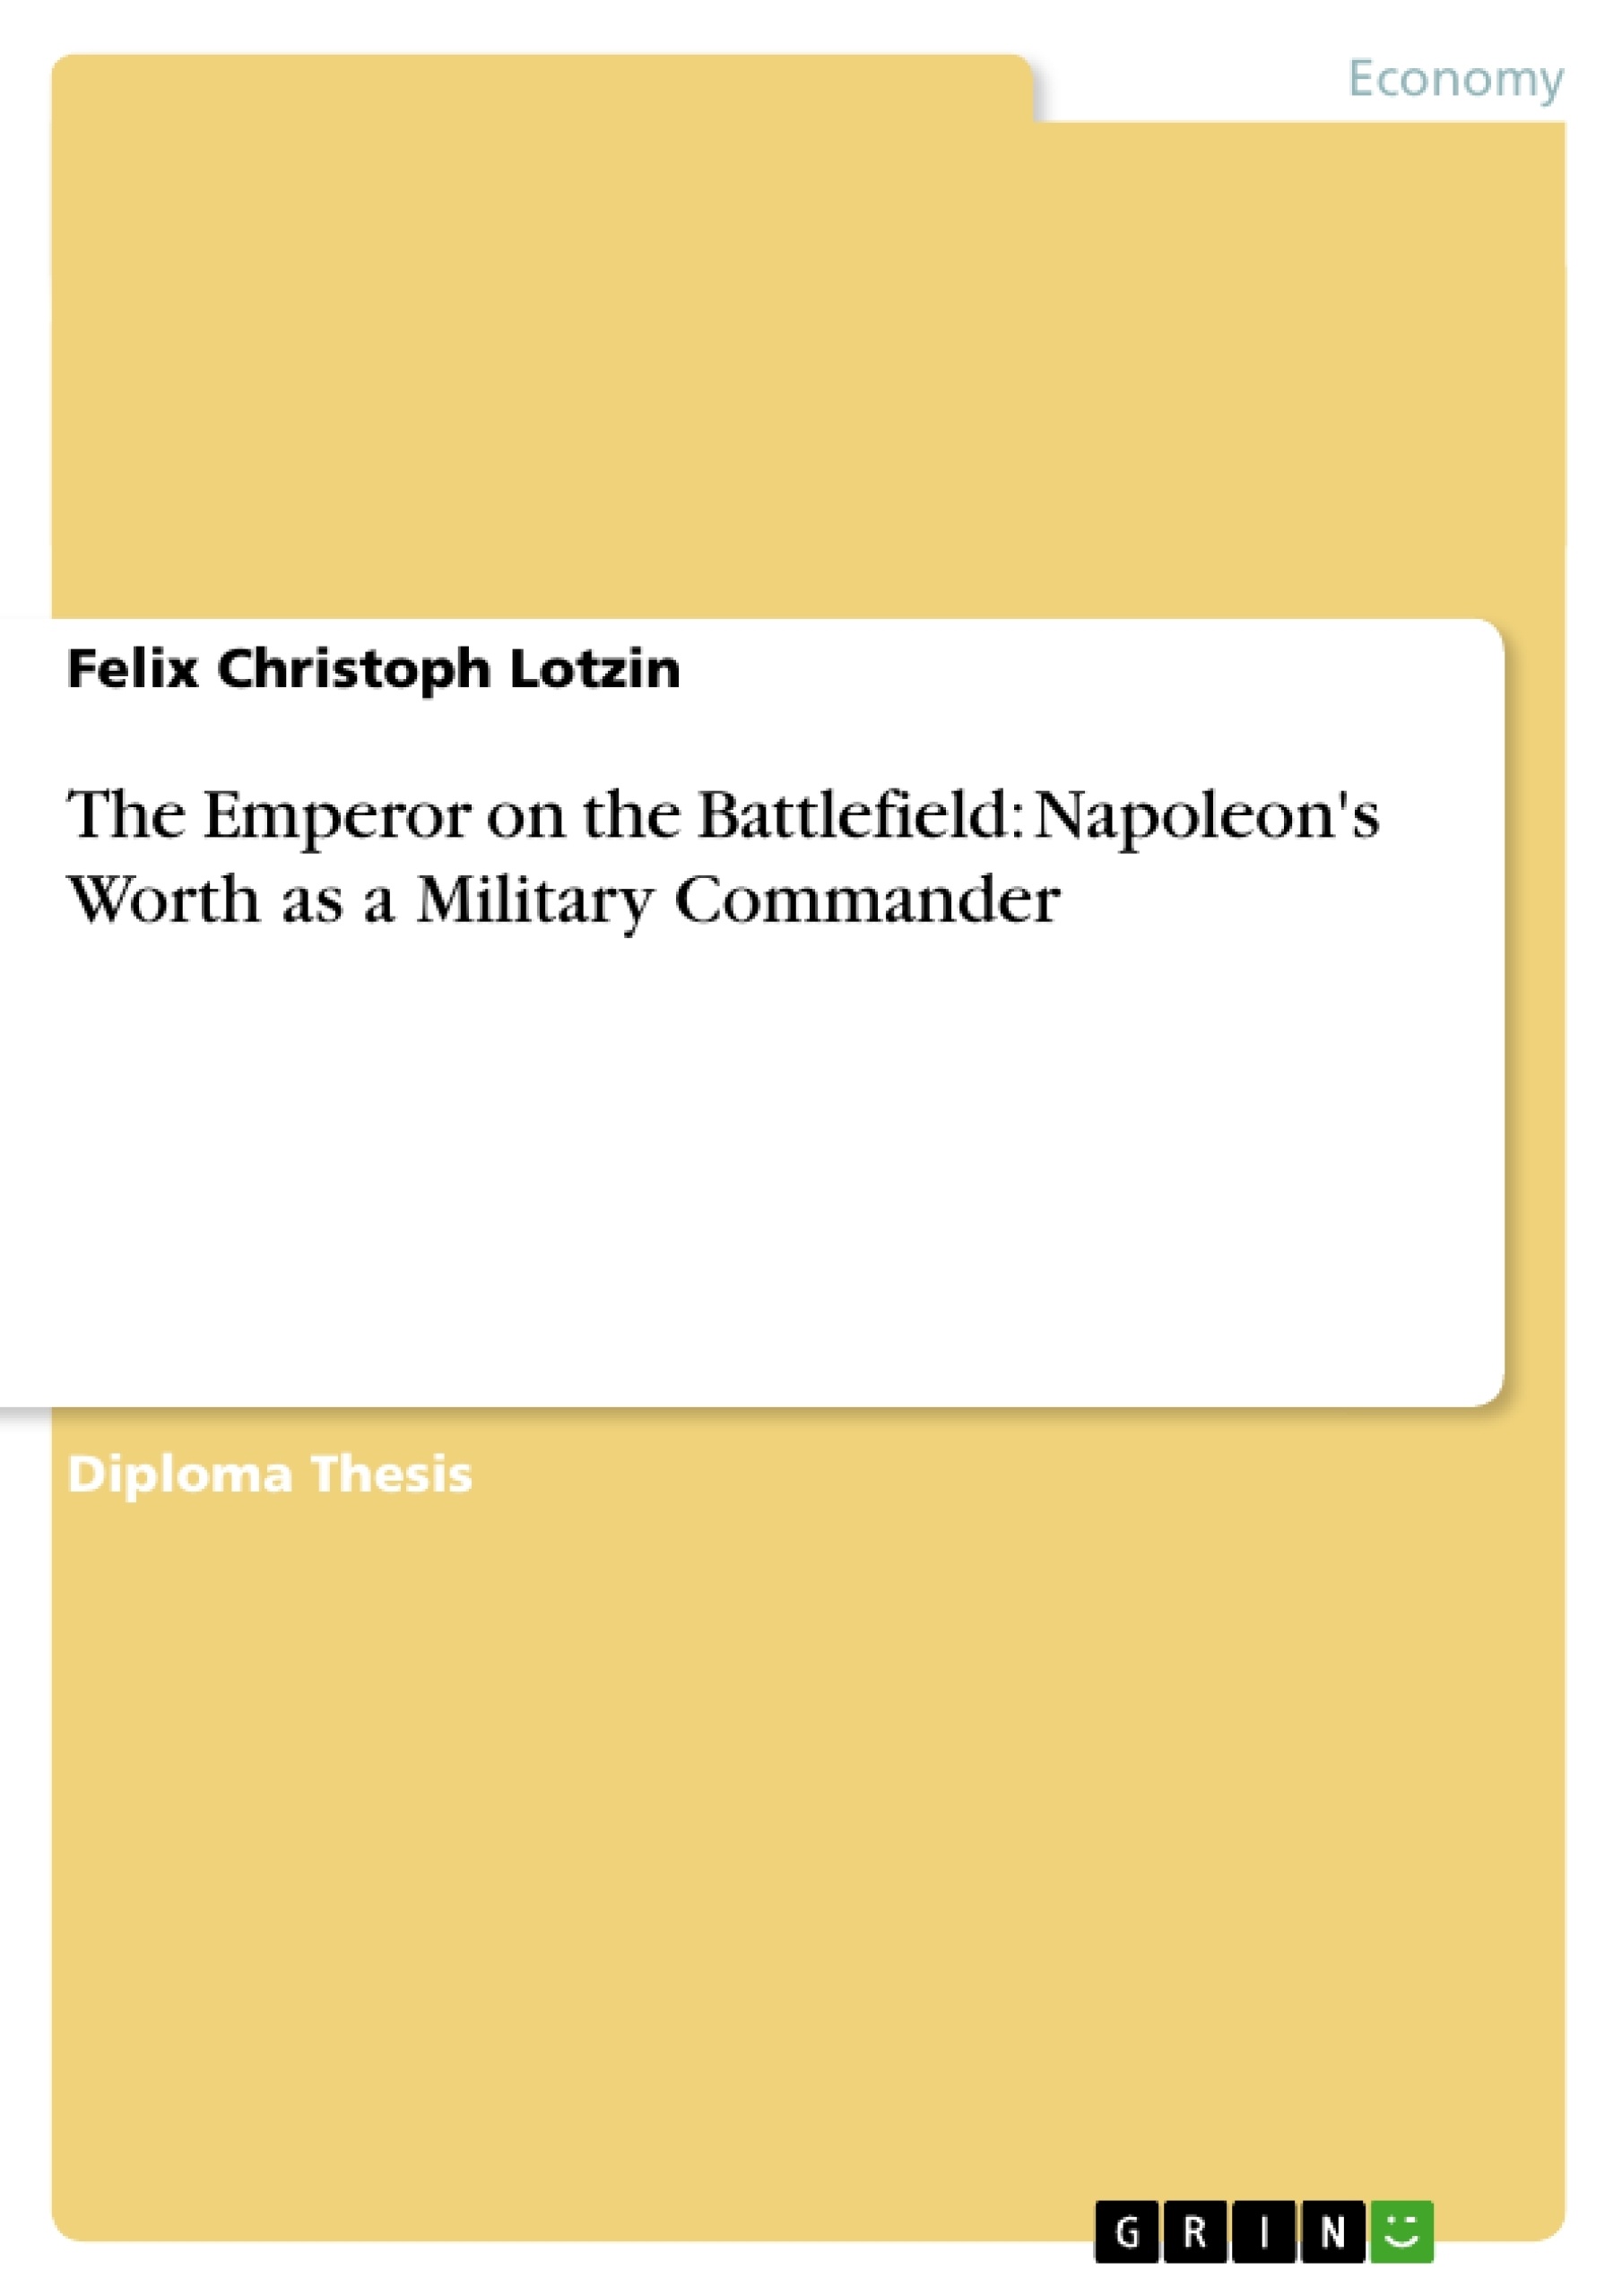 Title: The Emperor on the Battlefield: Napoleon's Worth as a Military Commander